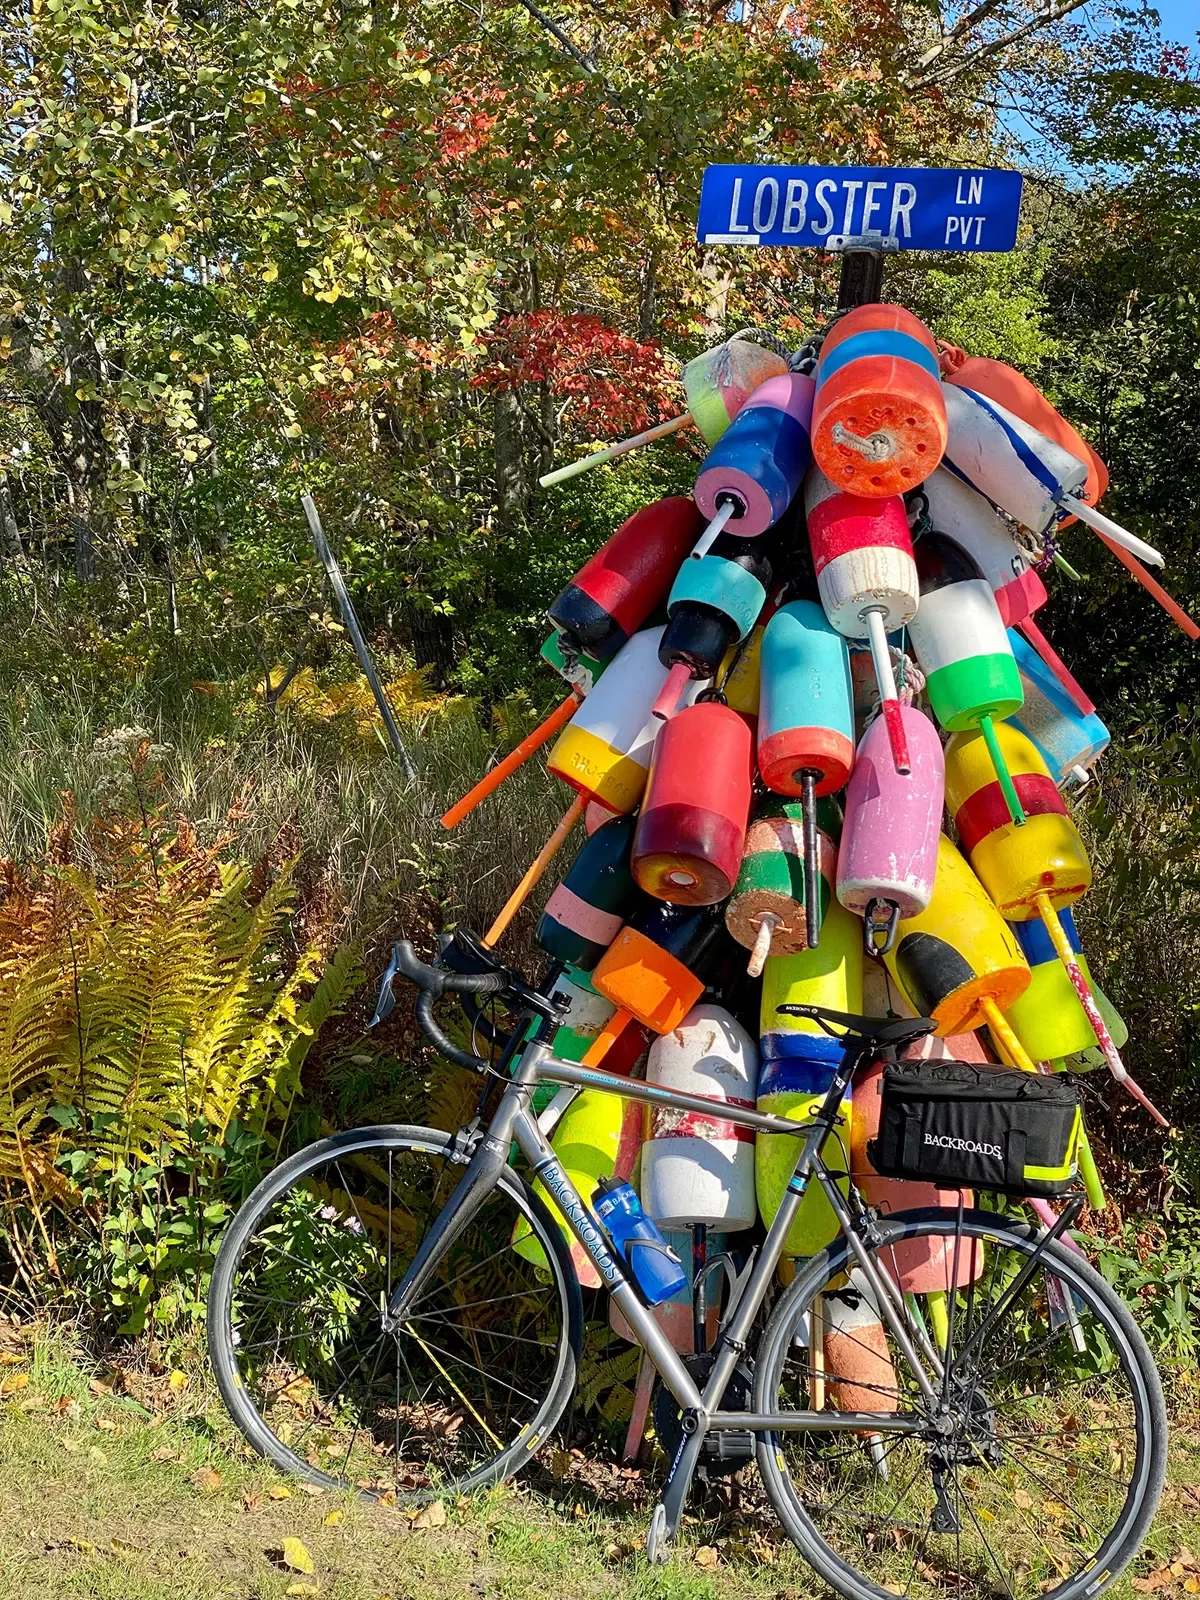 Bike parked at &quot;LOBSTER LN&quot; sign, numerous buoys tied around it.